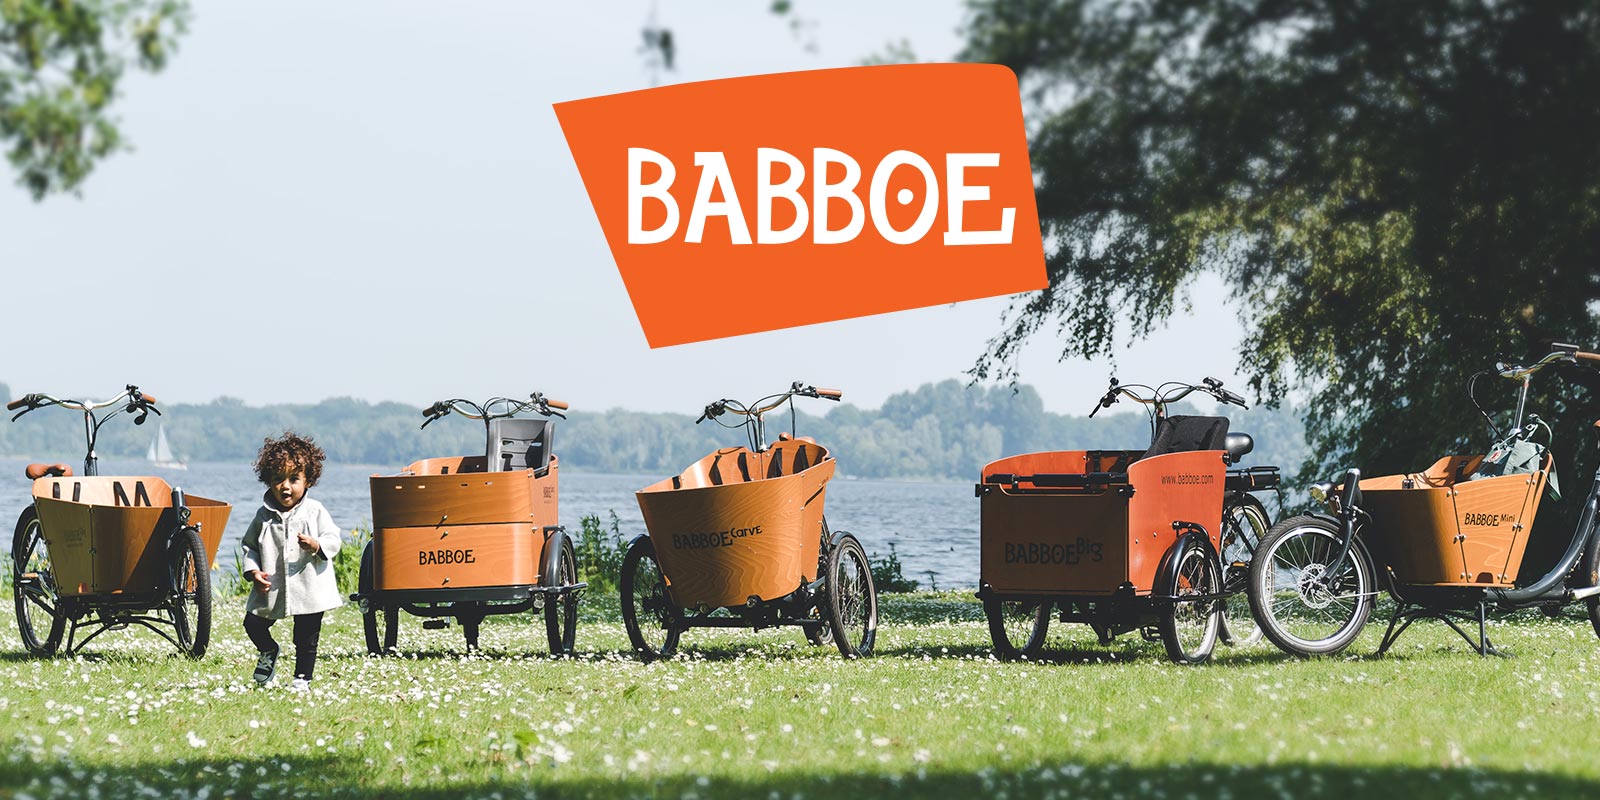 www.babboe.at